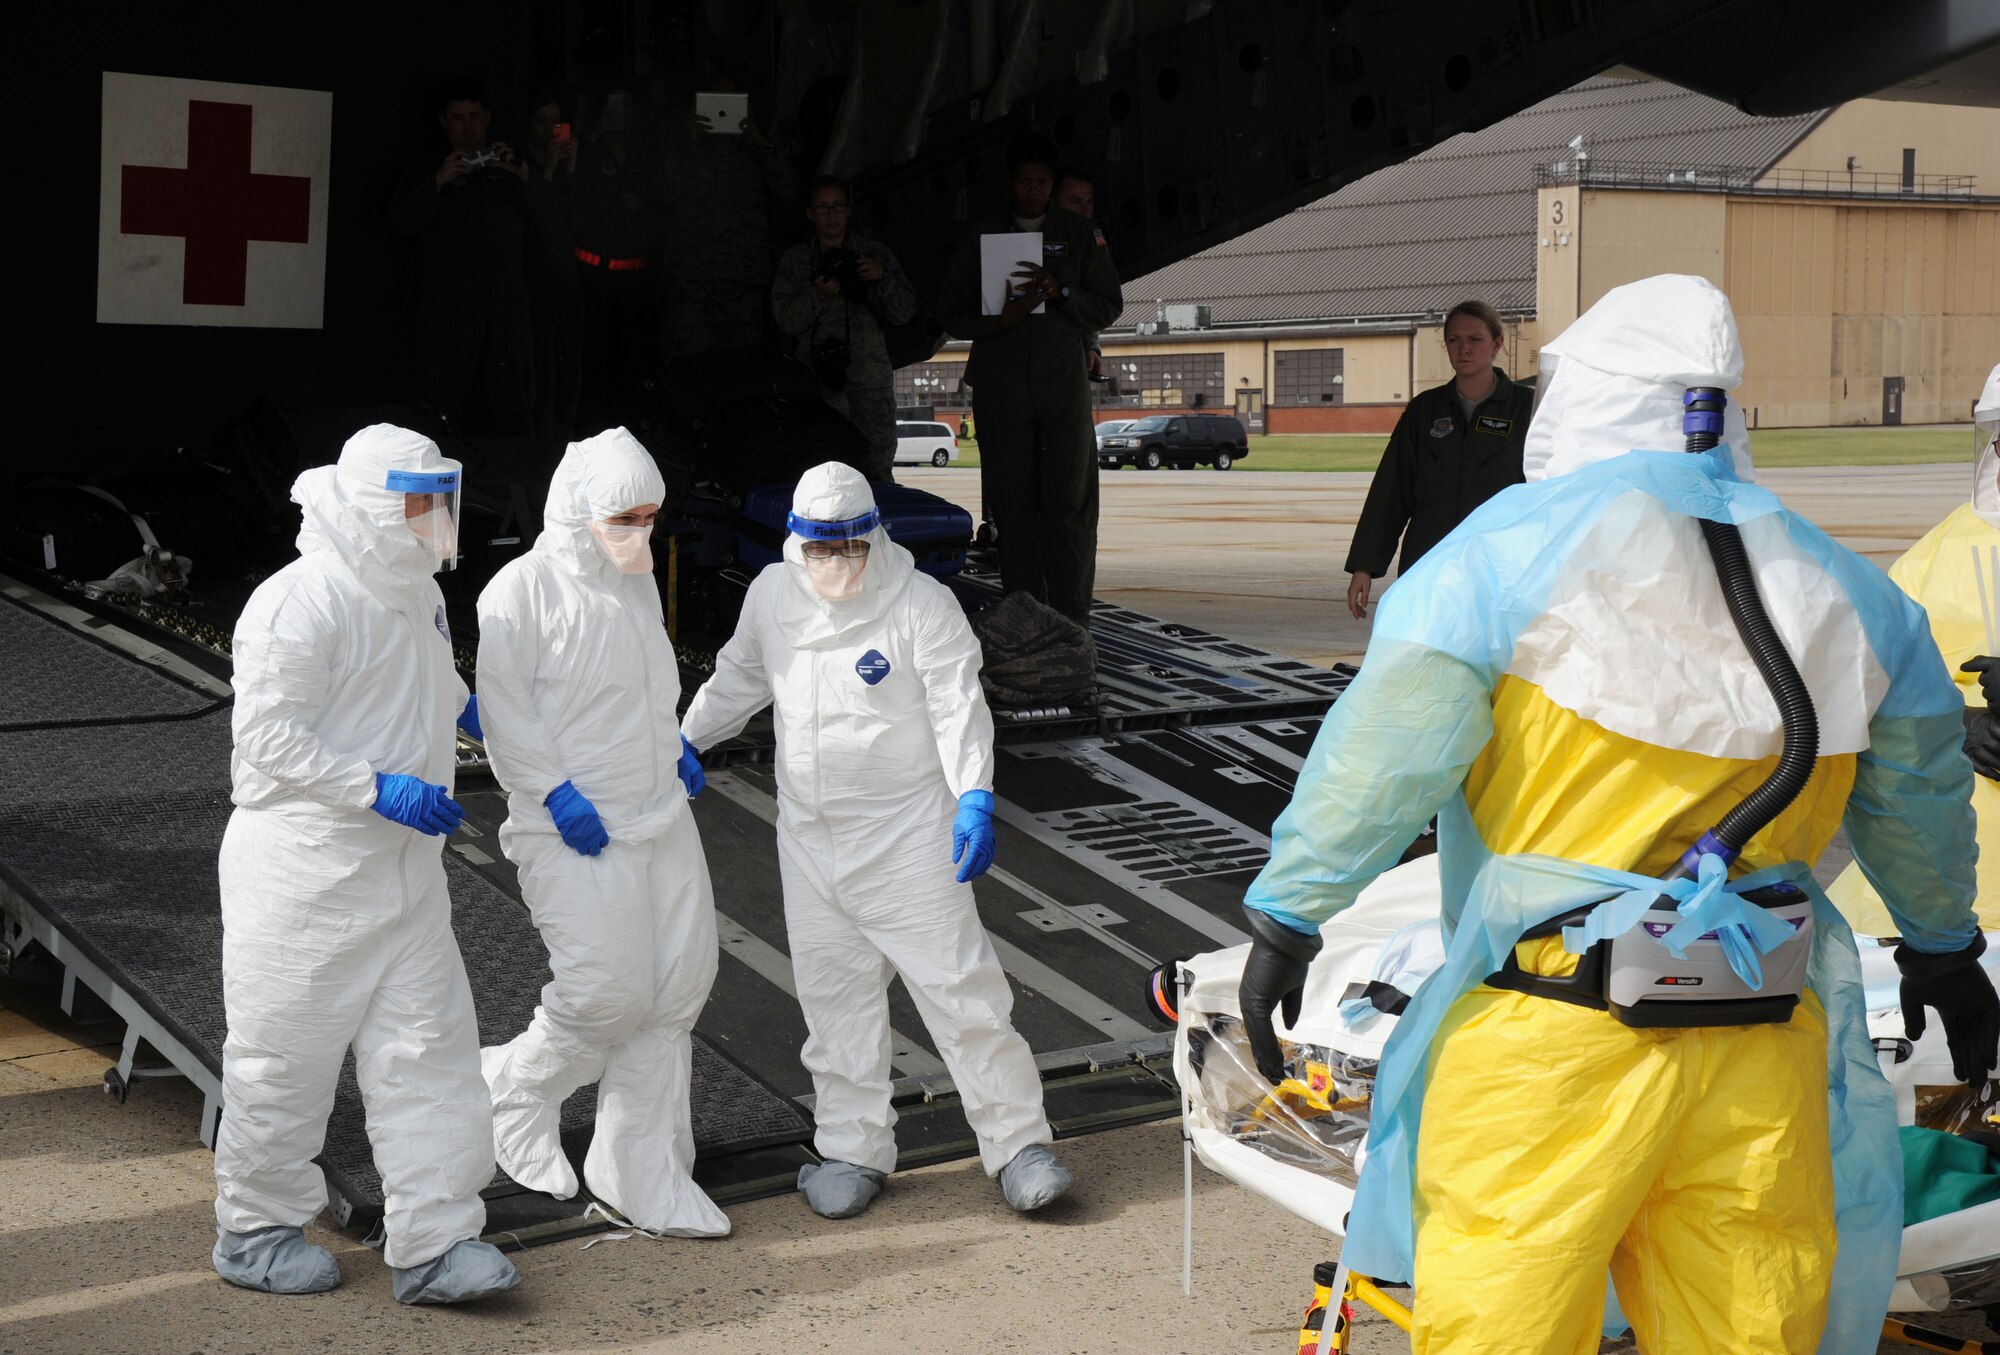 The Air Force District of Washington AFMS 79th Medical Wing and other military medical personnel assigned to Walter Reed National Military Medical Center transfers a simulated patient for further care at WRNMMC during the 2016 Mobility Solace Exercise, exercising the ability of military medics to safely transport patients with High Consequence Infectious Diseases, such as Ebola. The patient traveled to Joint Base Andrews from Joint Base Charleston via an Air Mobility Command C-17 Globemaster III transport aircraft. (U.S. Air Force/Jim Lotz)